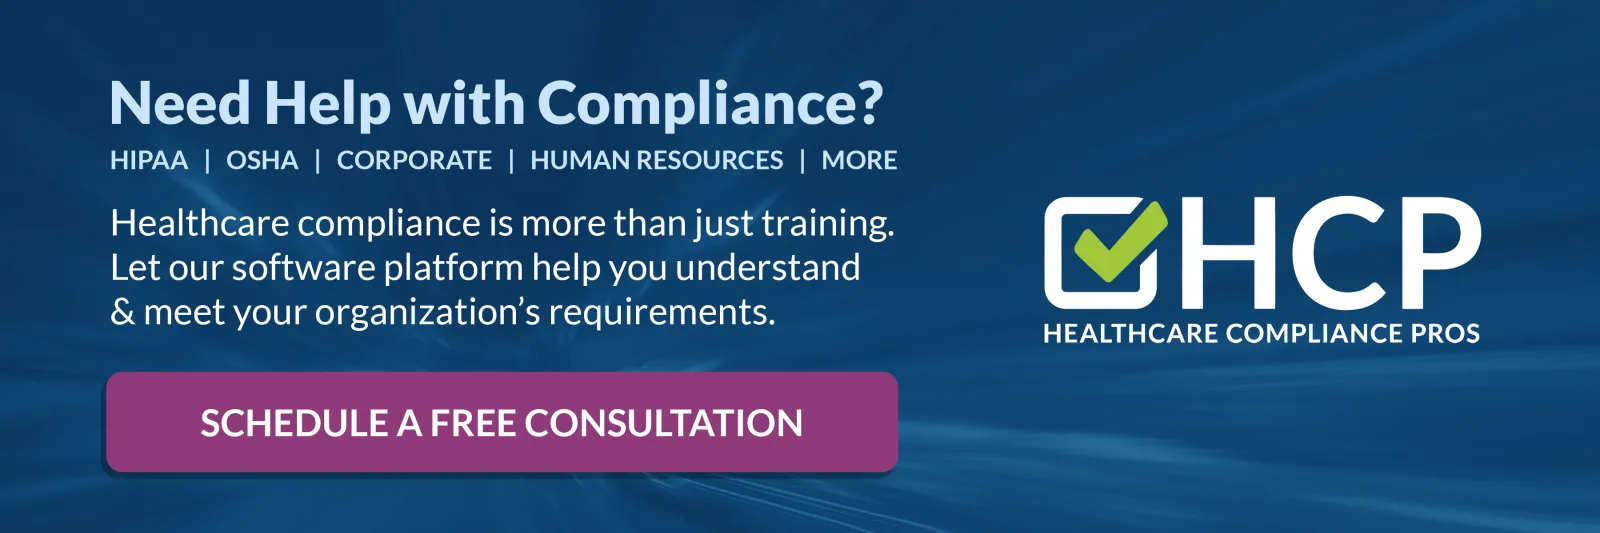 Need Help with Healthcare Compliance? Let our software get your organization towards becoming compliant.